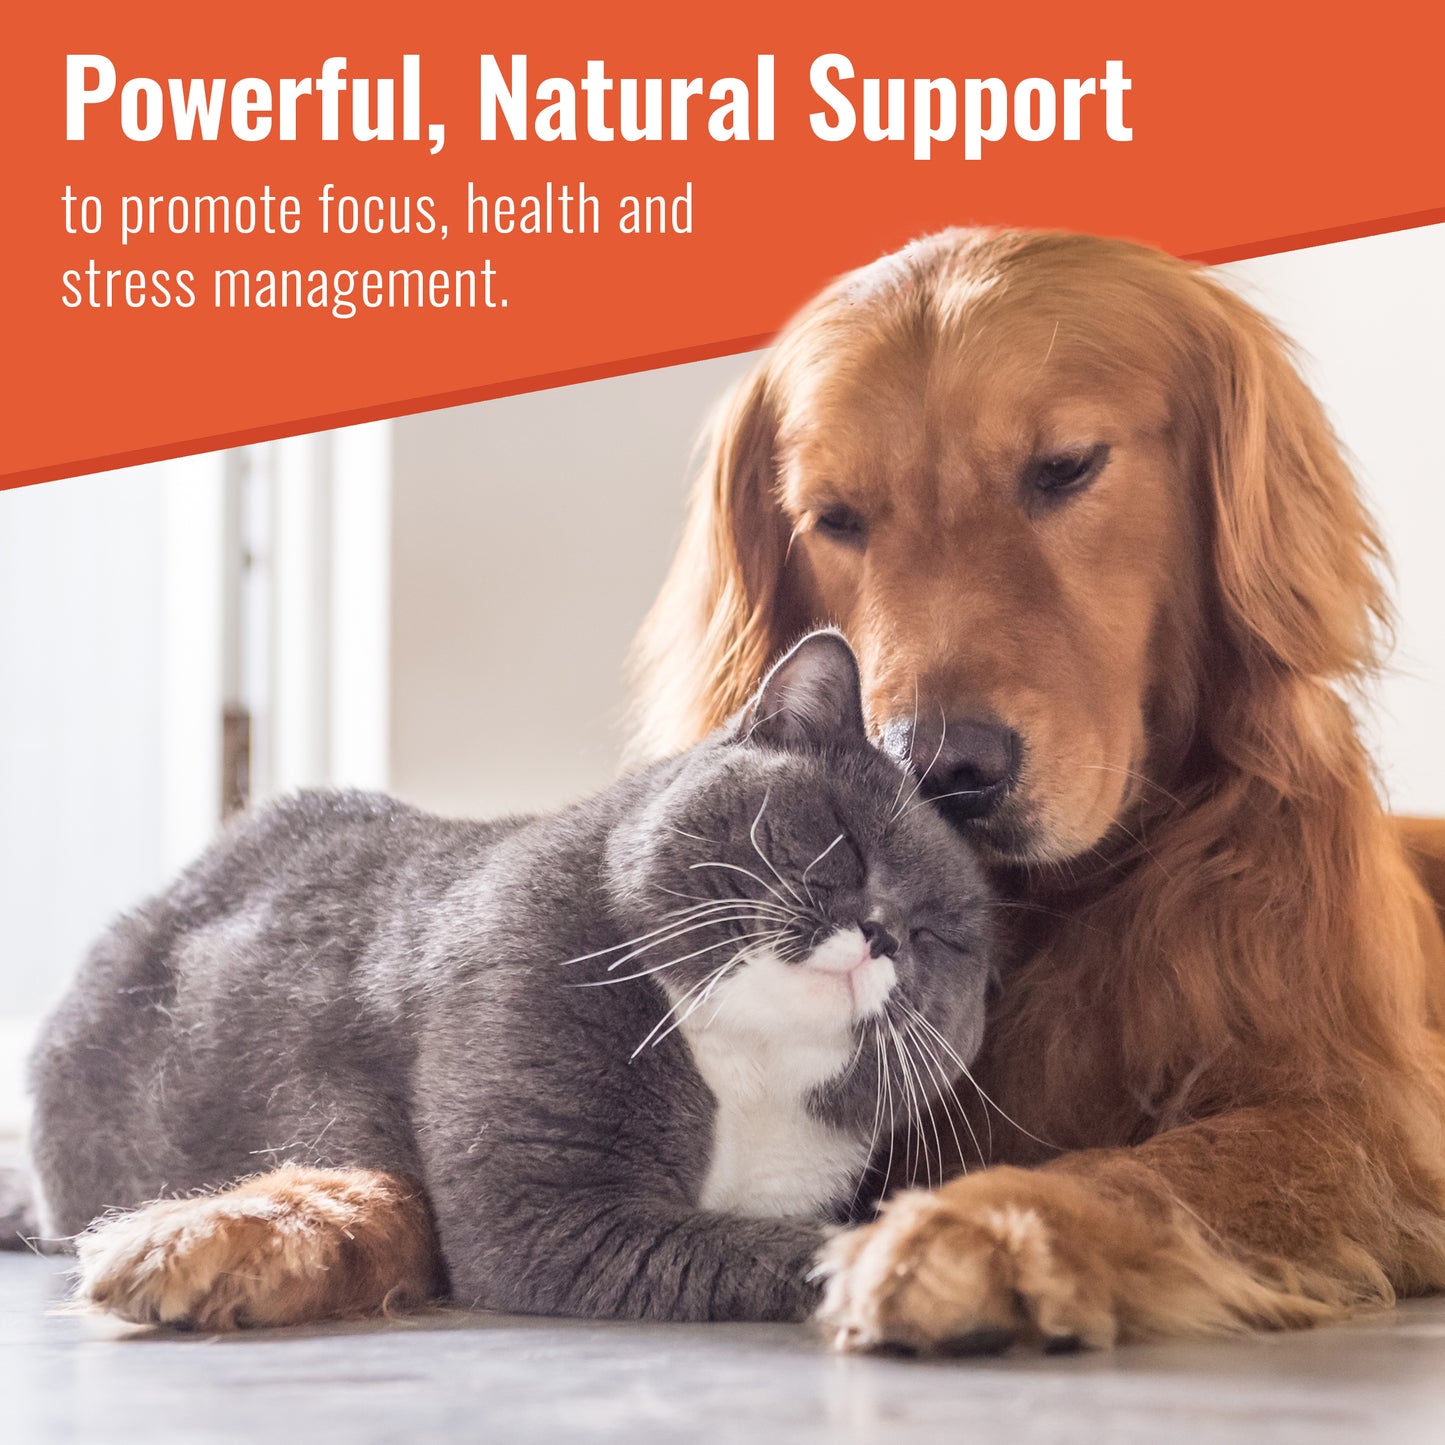 hide|Canine Matrix Zen provides powerful, natural support to promote focus, health and stress management for your dog or cat.